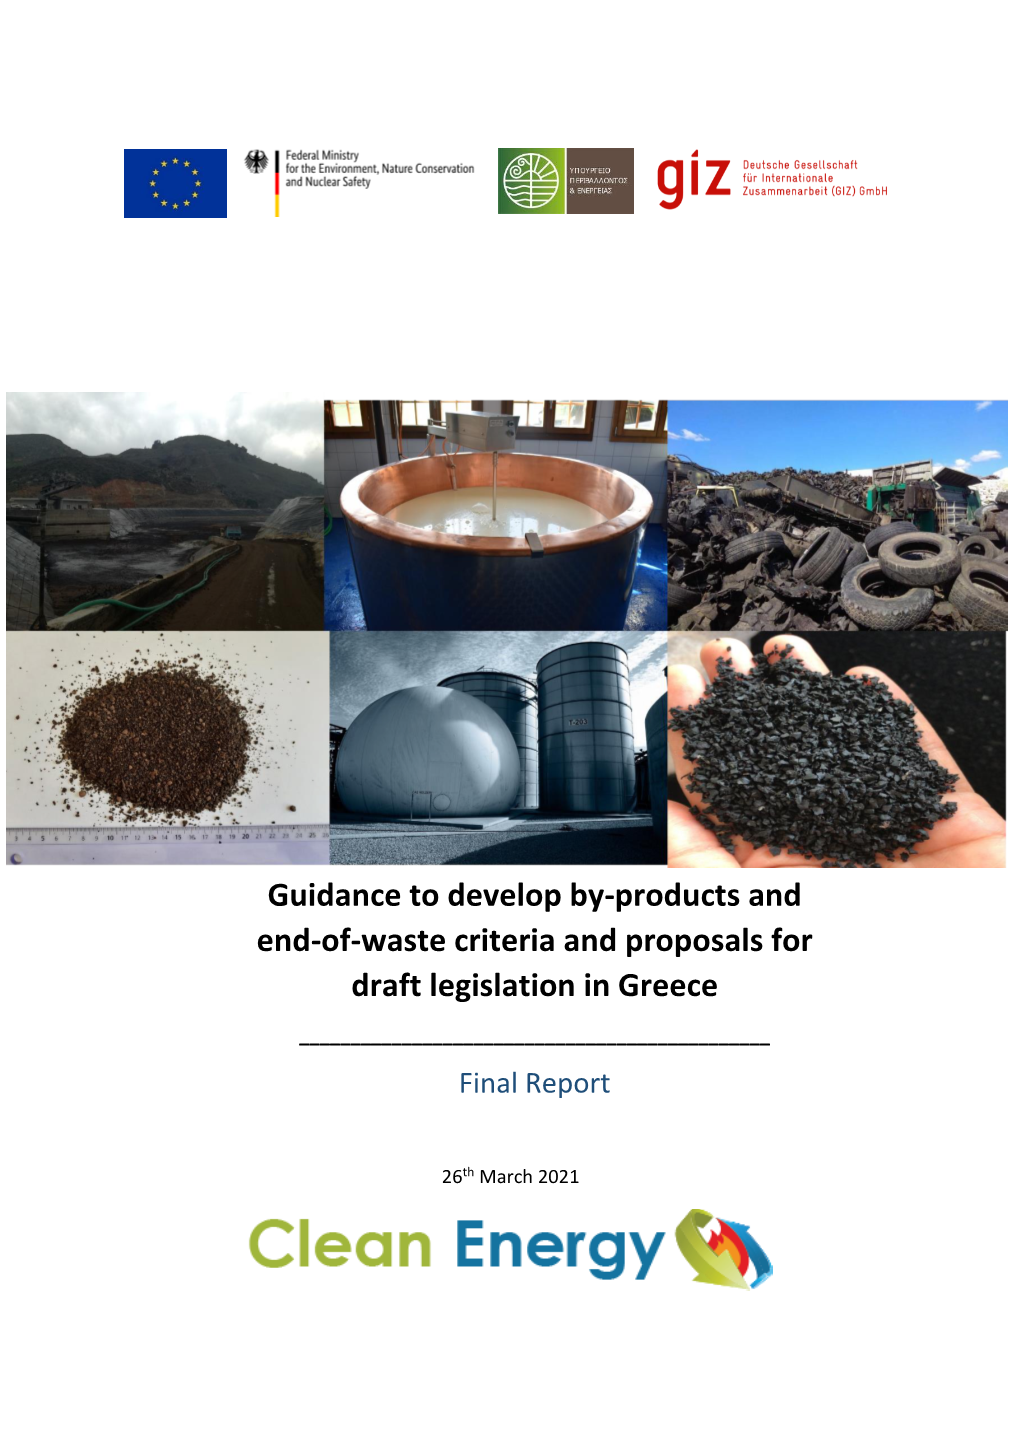 Guidance to Develop By-Products and End-Of-Waste Criteria and Proposals for Draft Legislation in Greece